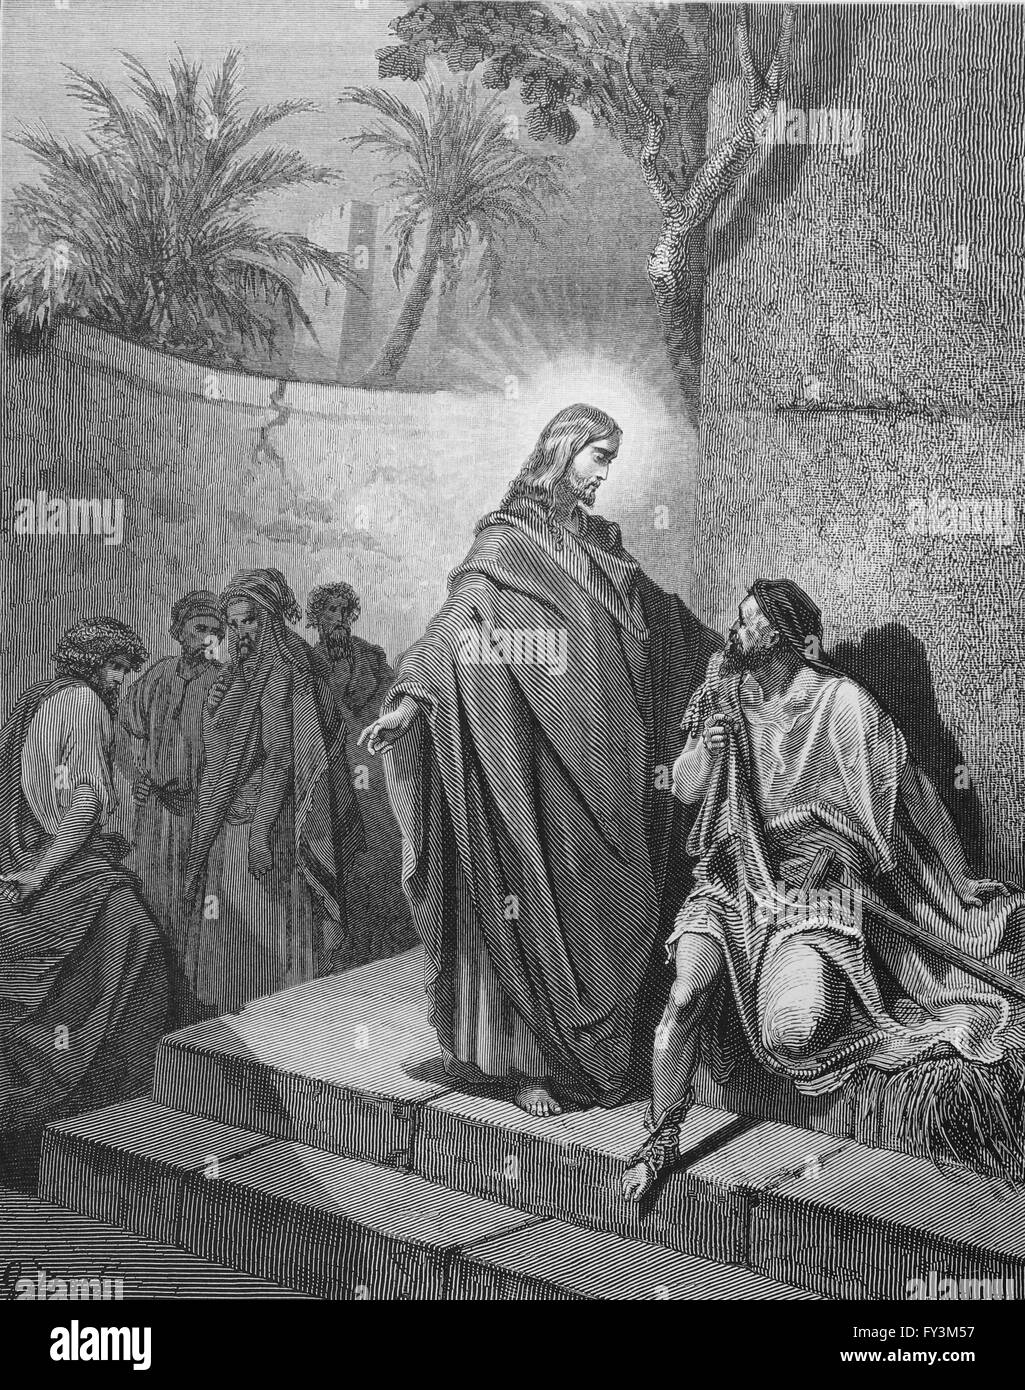 New Testament. Jesus healing the Dumb Man possessed (Matthew 12.22). Engraving by Gustave Dore. Stock Photo